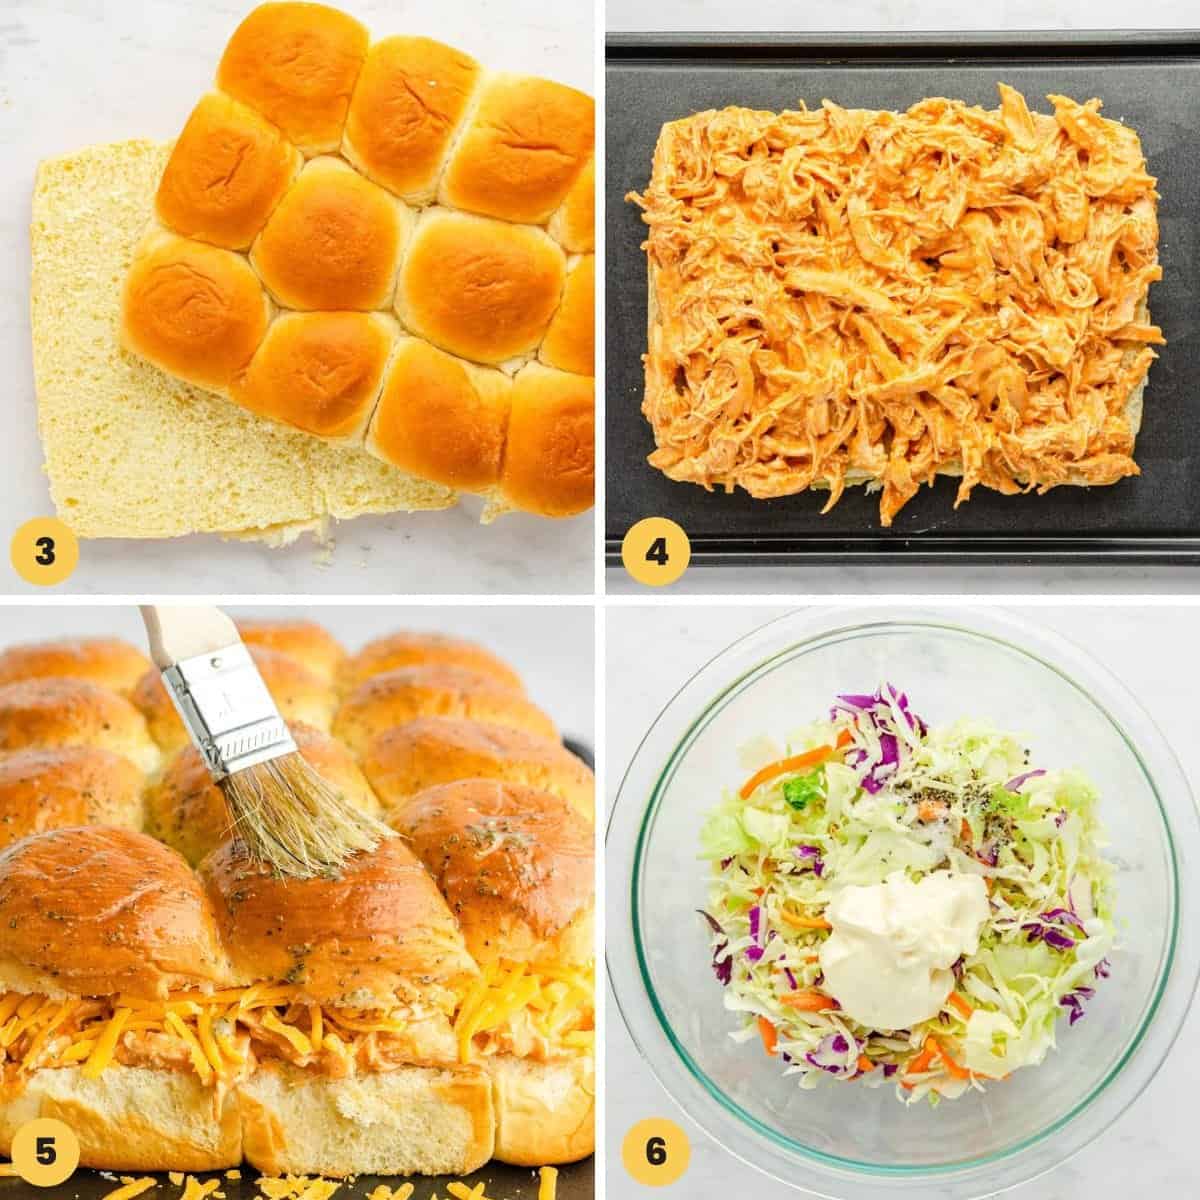 A collage of images showing how to assemble buffalo chicken sandwiches on mini hawaiian rolls.